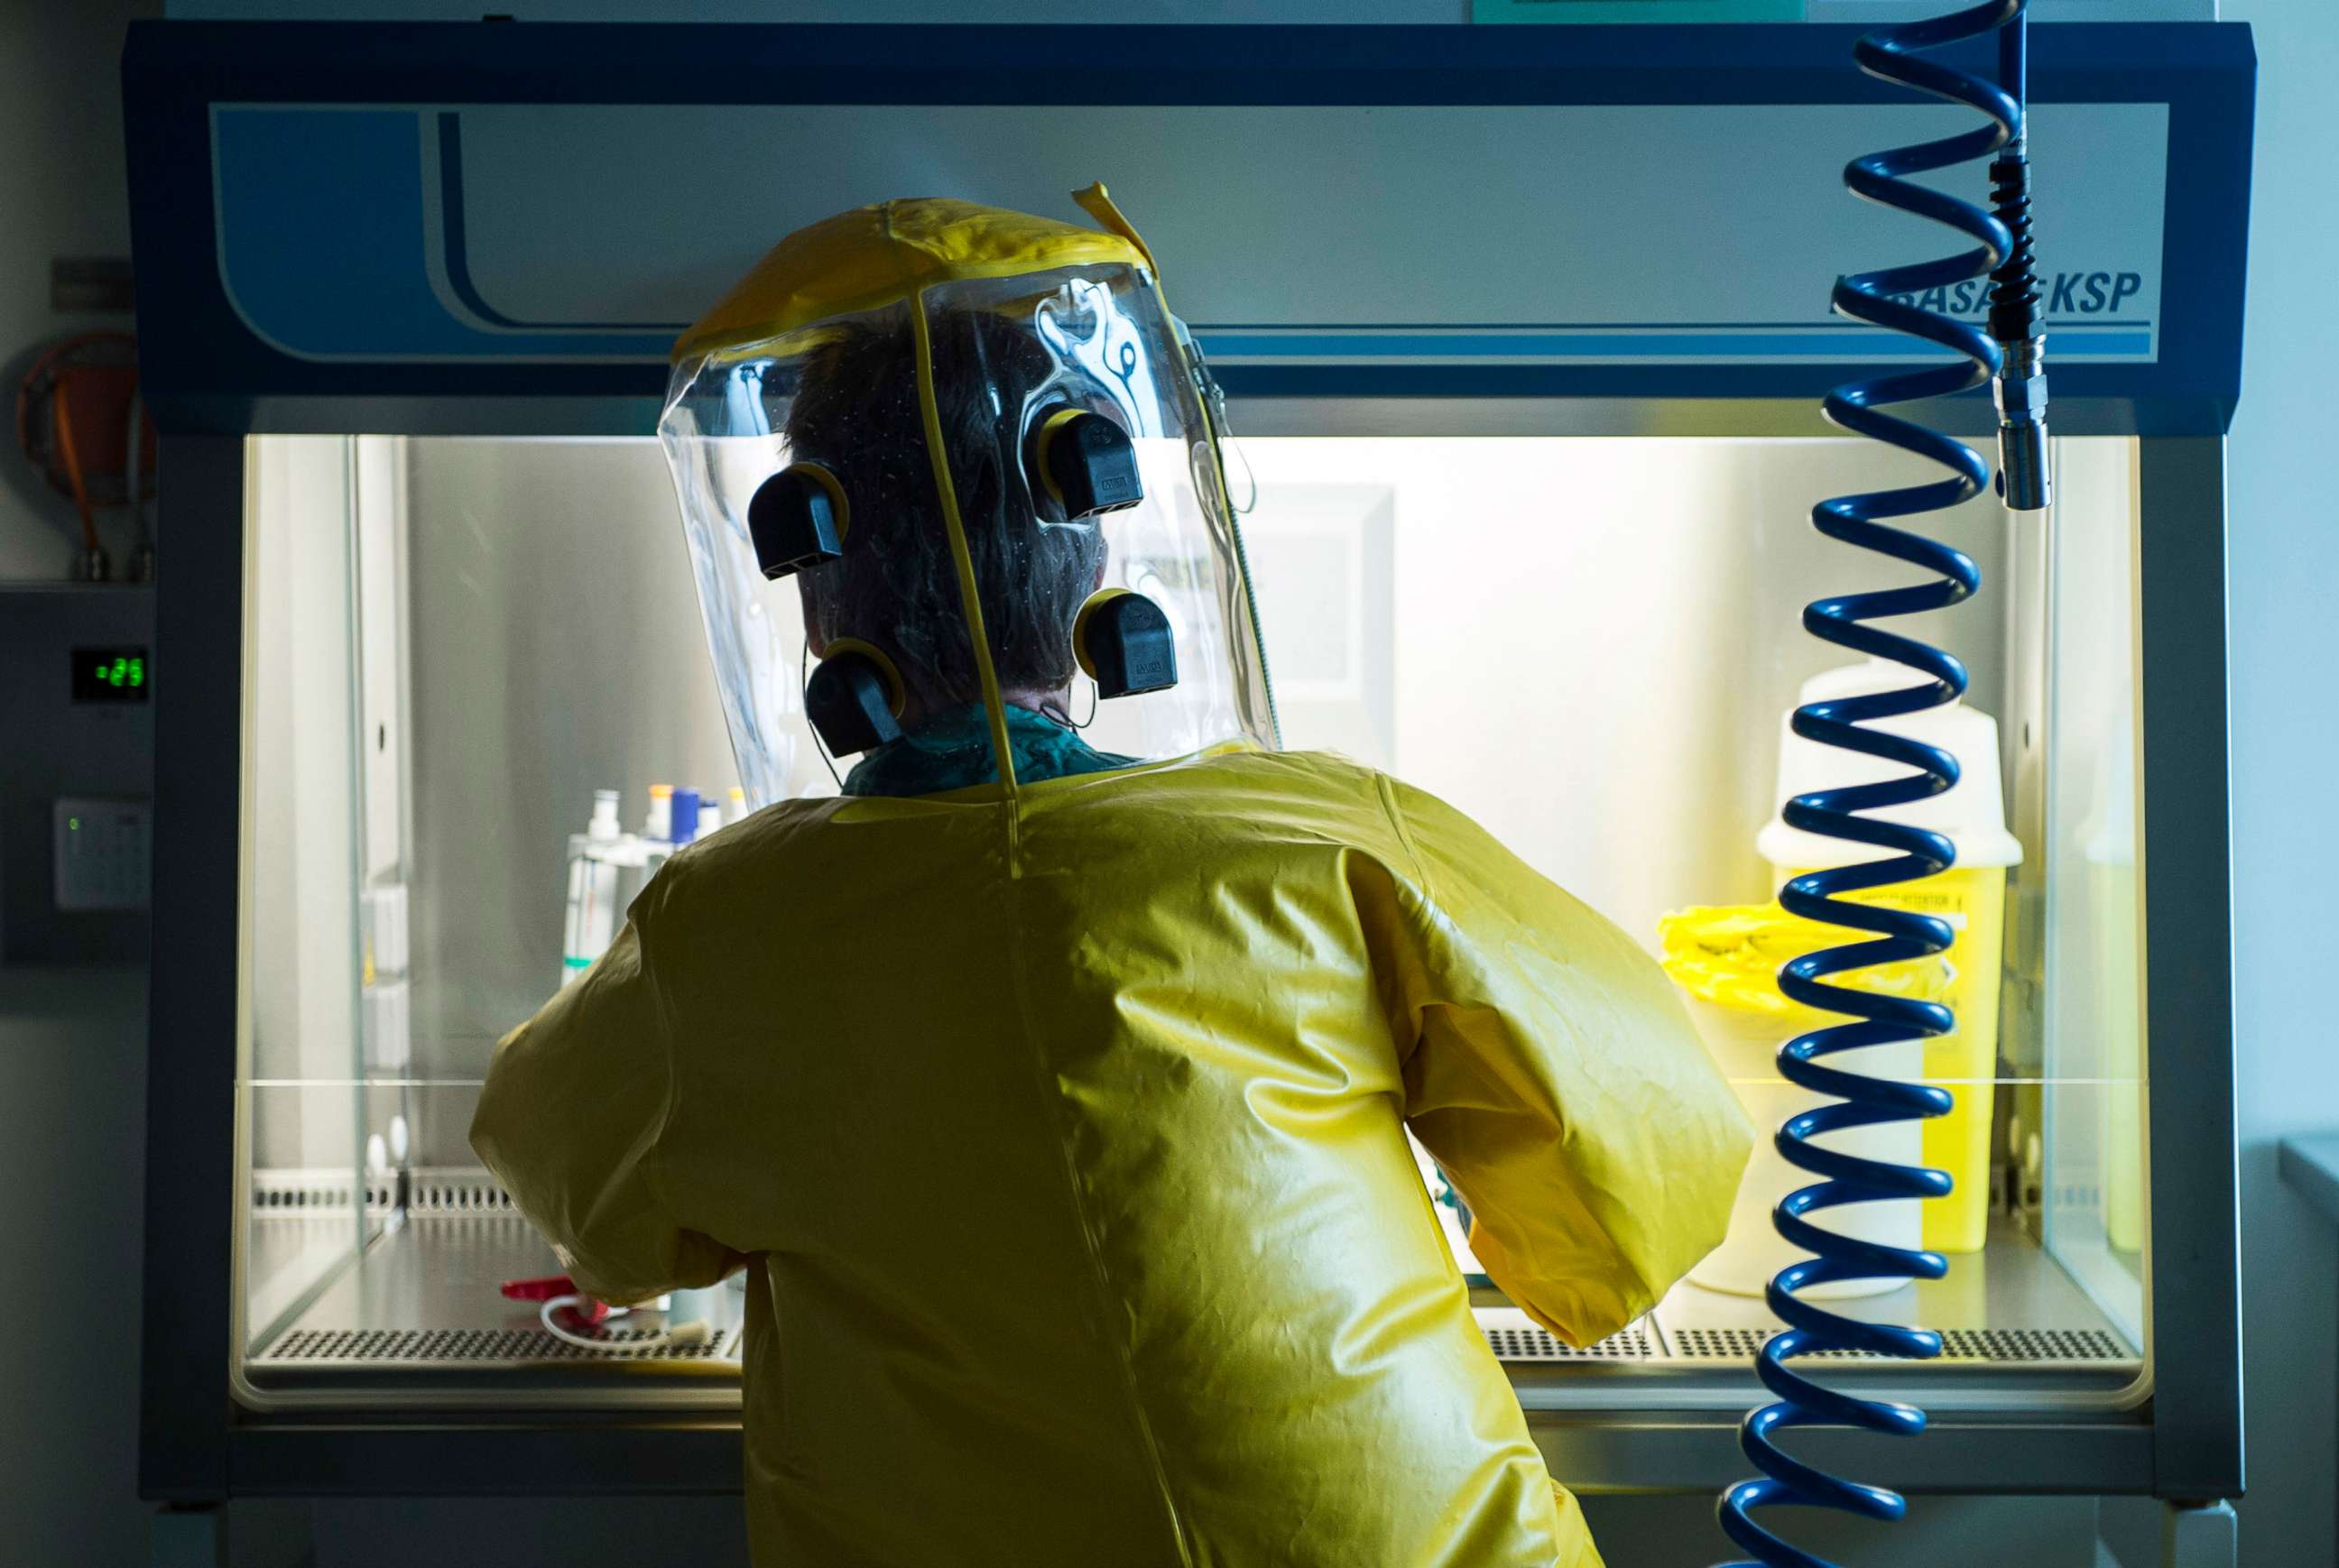 PHOTO: In this file photo, Nov. 19, 2014, a virologist works inside the Spiez Laboratory that conducts chemical weapons tests in Spiez, Switzerland.